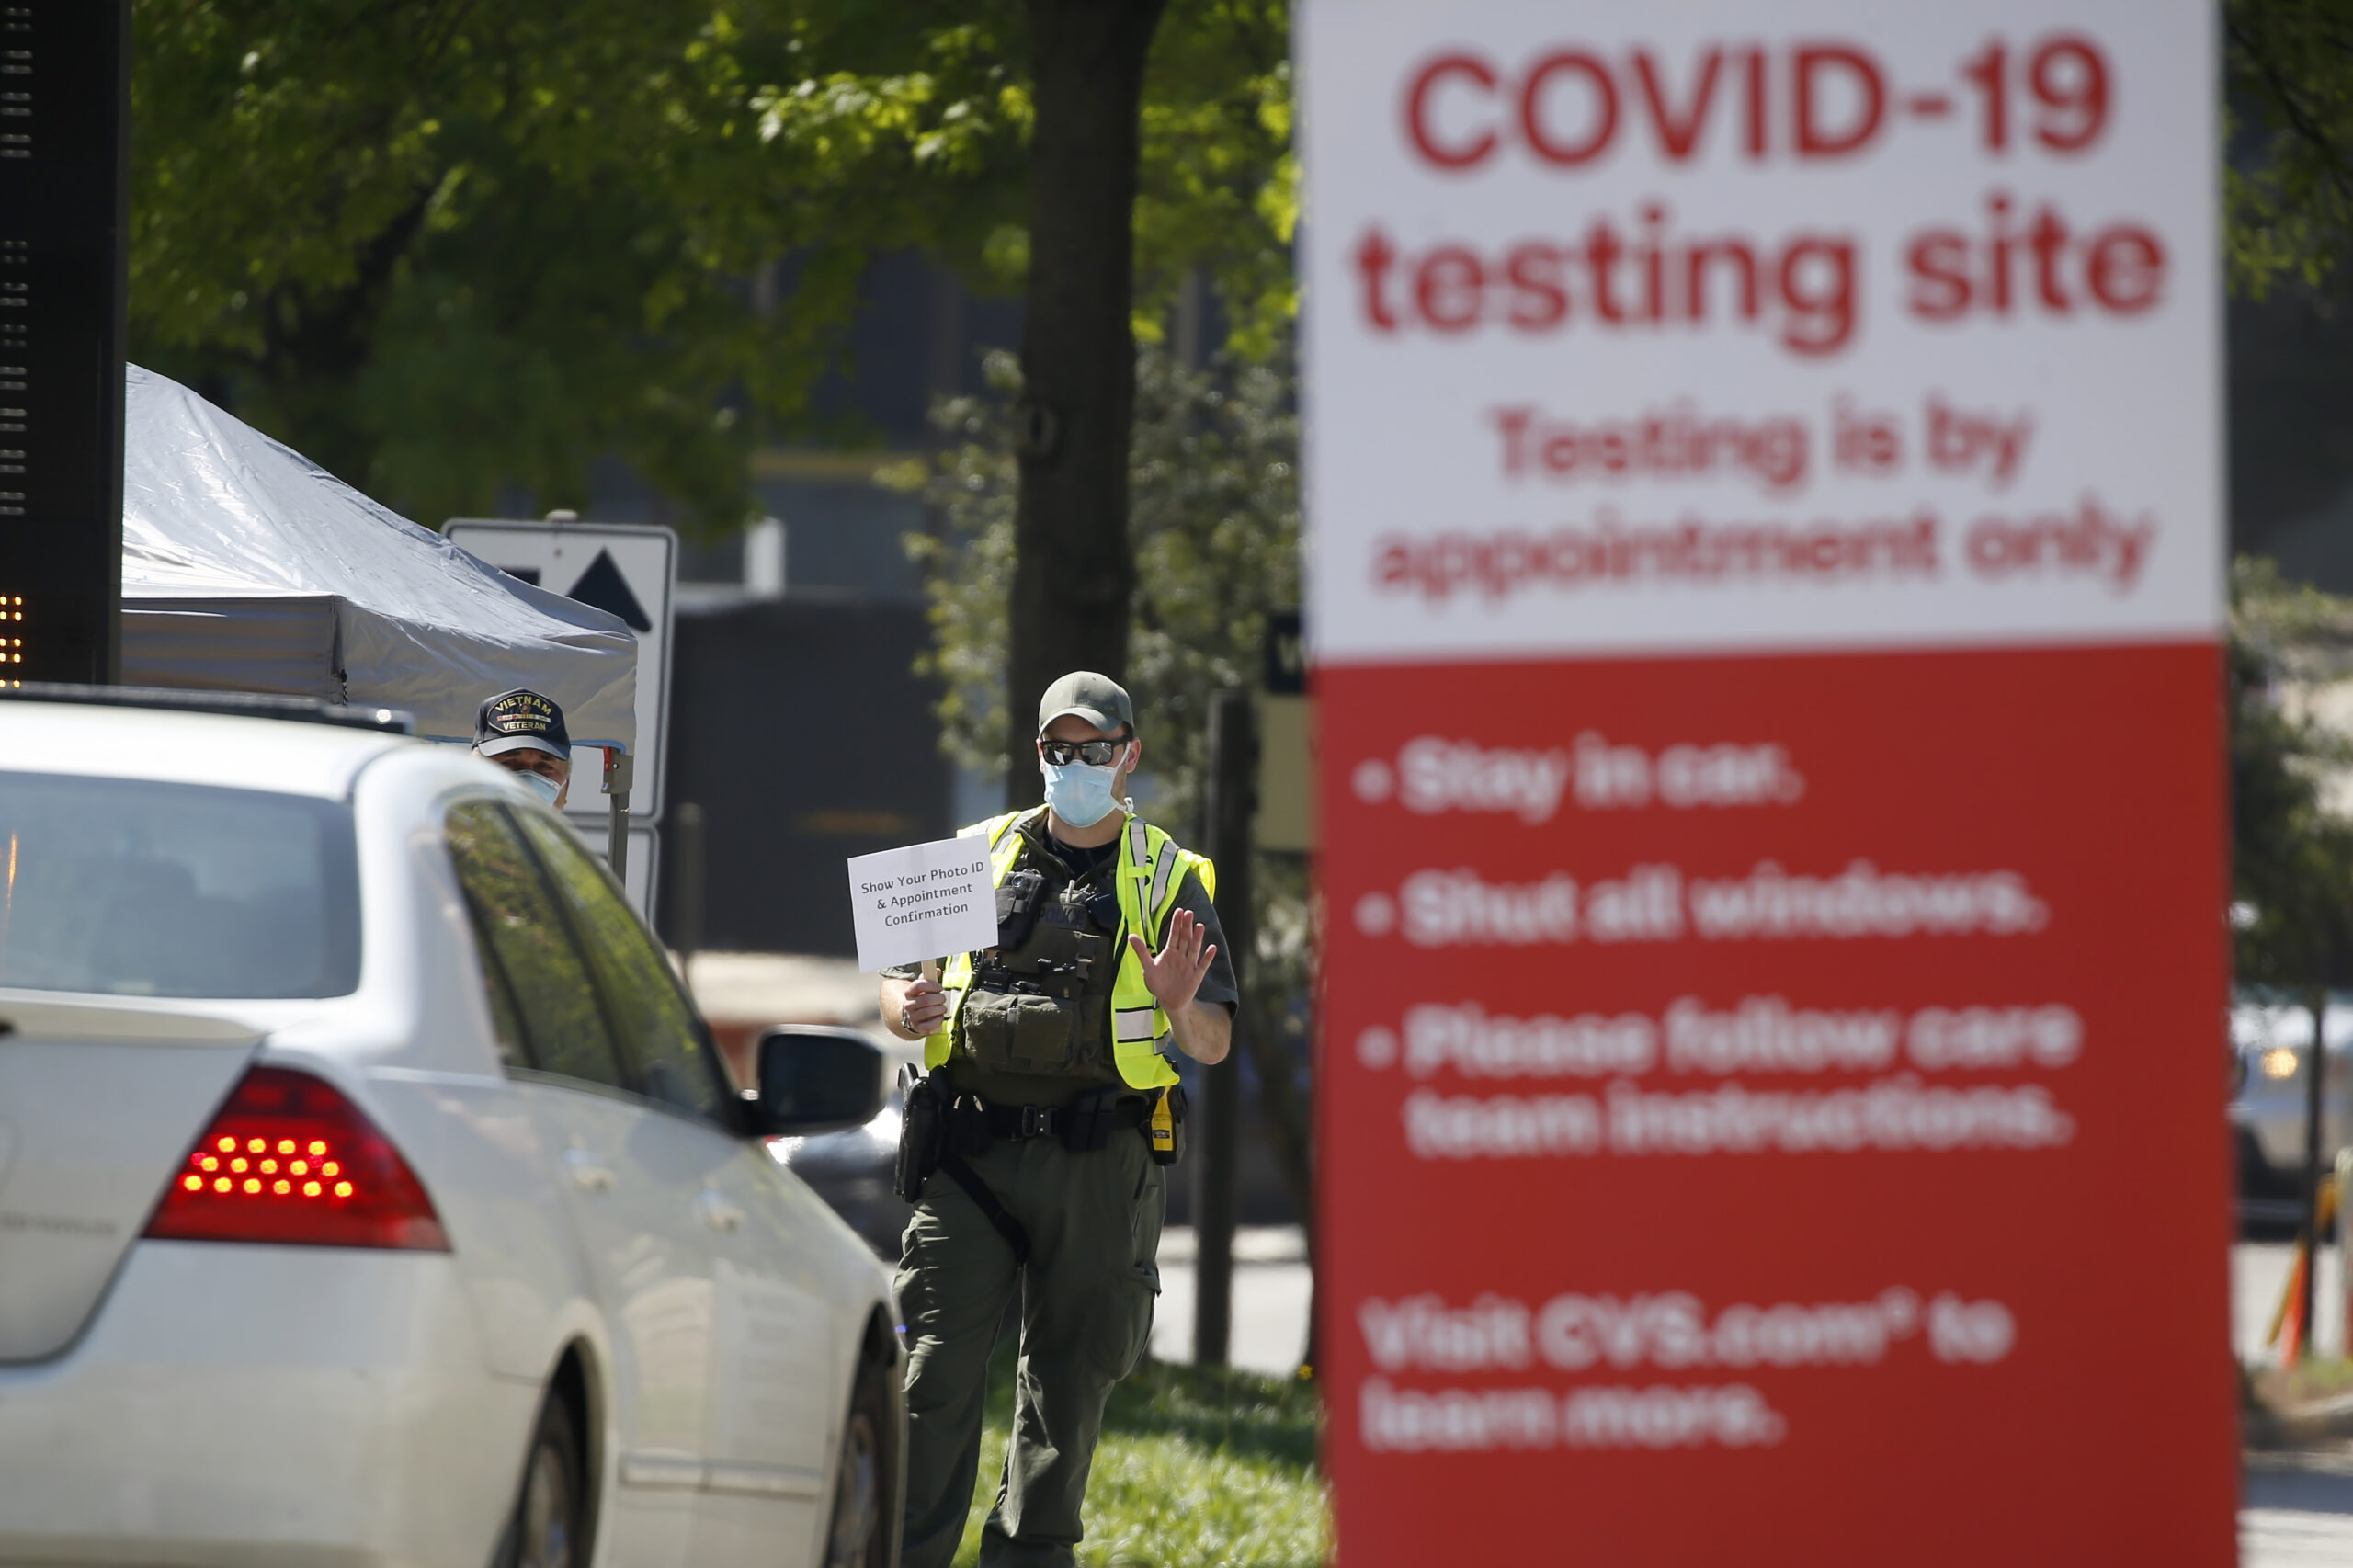 A police officer directs cars into a coronavirus testing facility